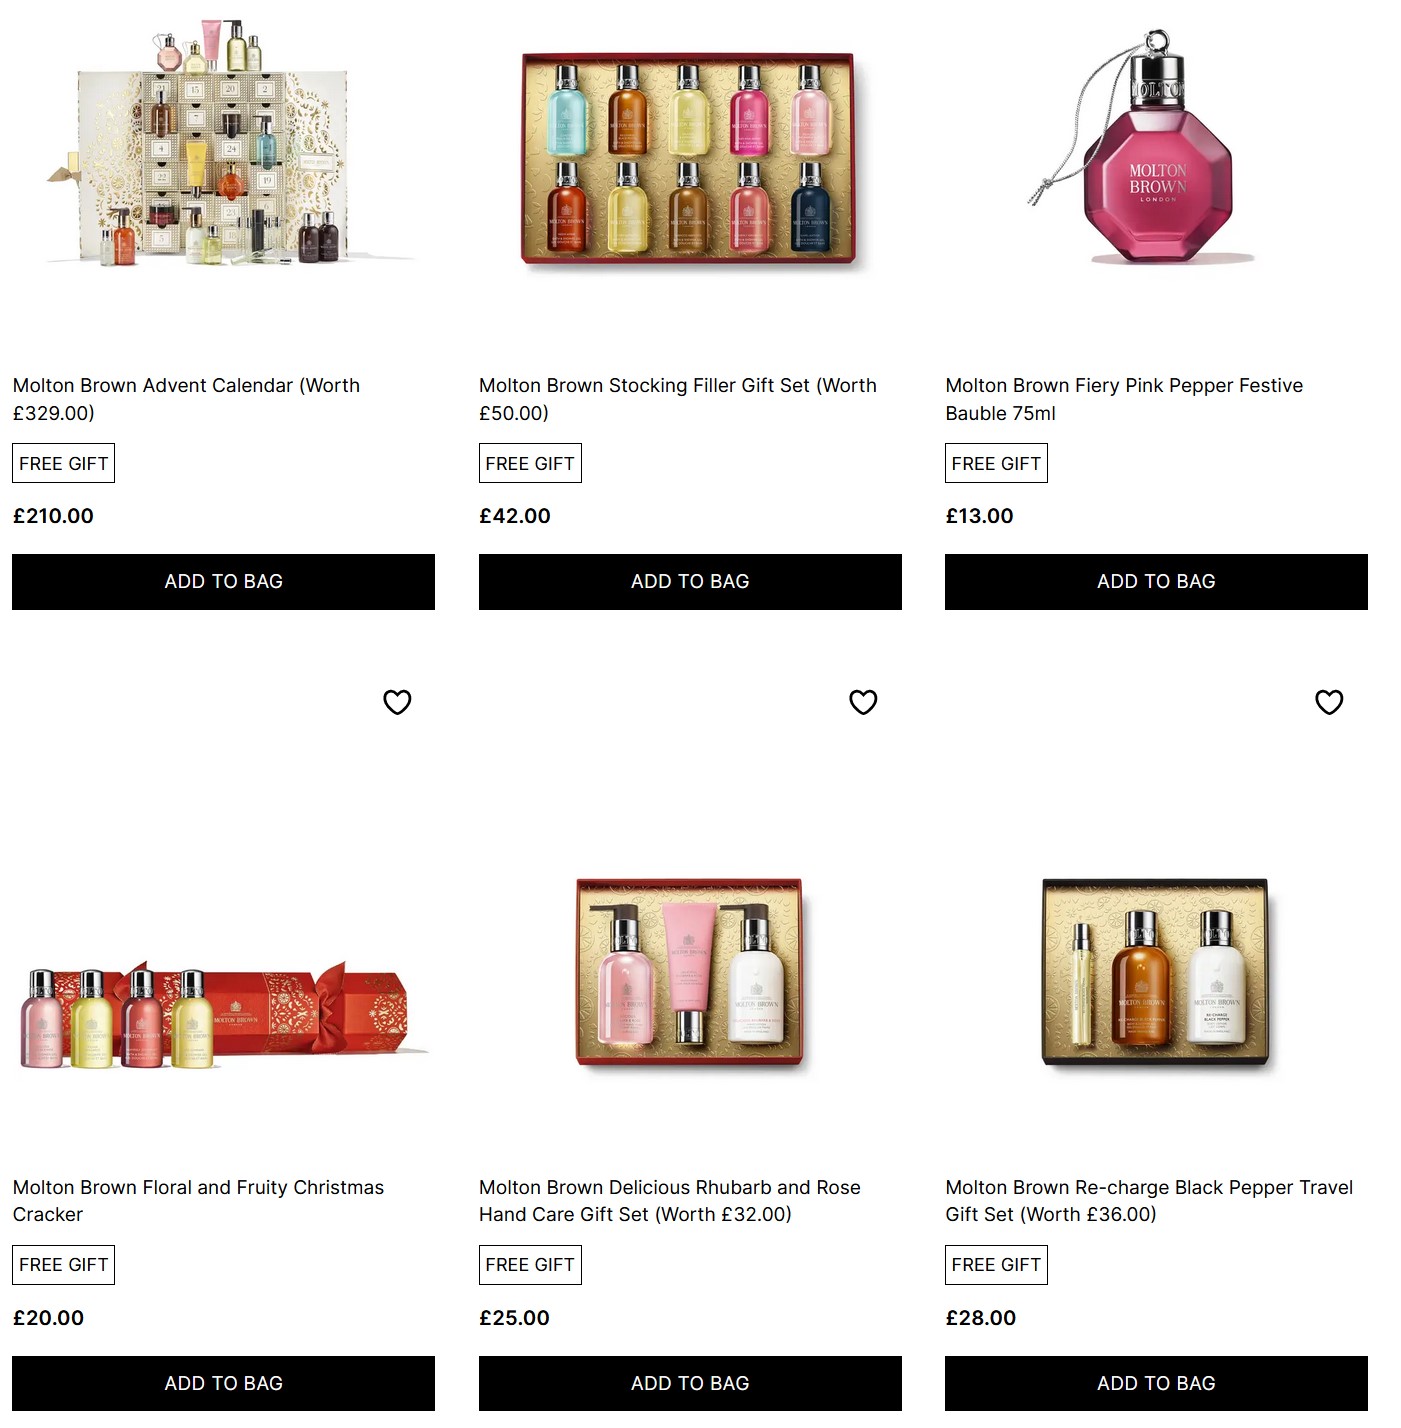 15% off Molton Brown Holiday Collection at Cult Beauty